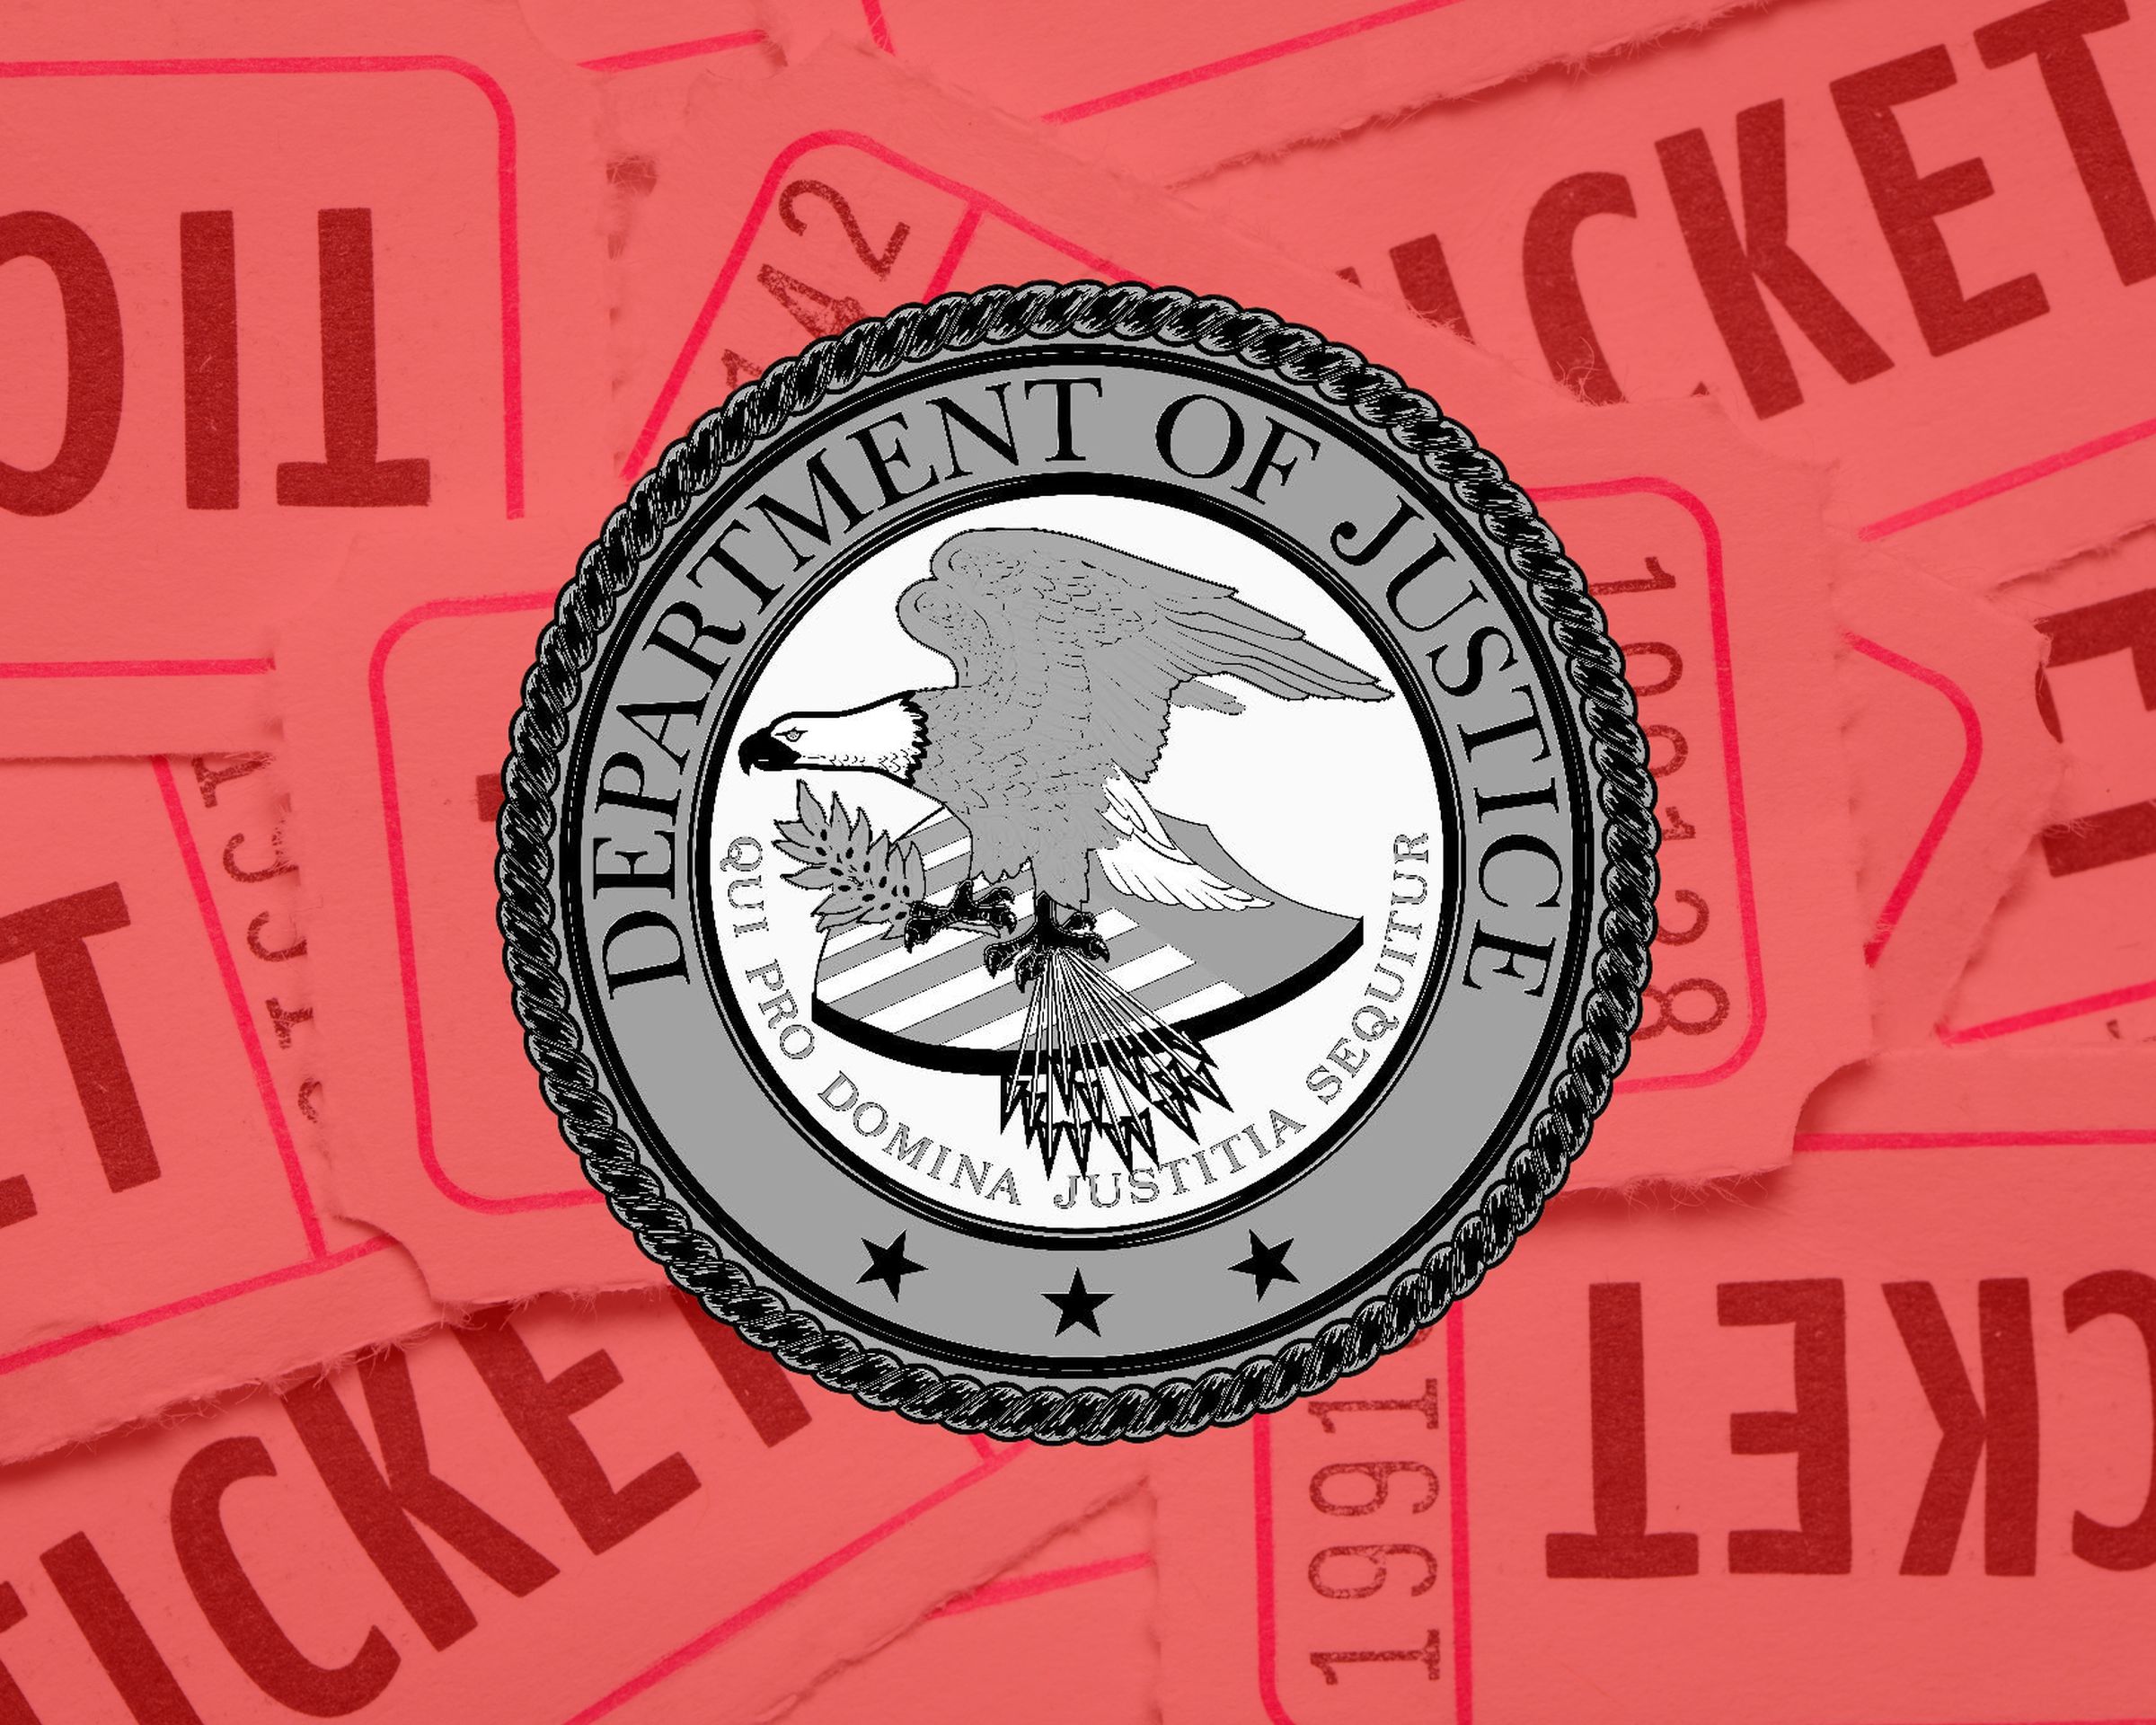 The US Department of Justice logo above a red ticket background.